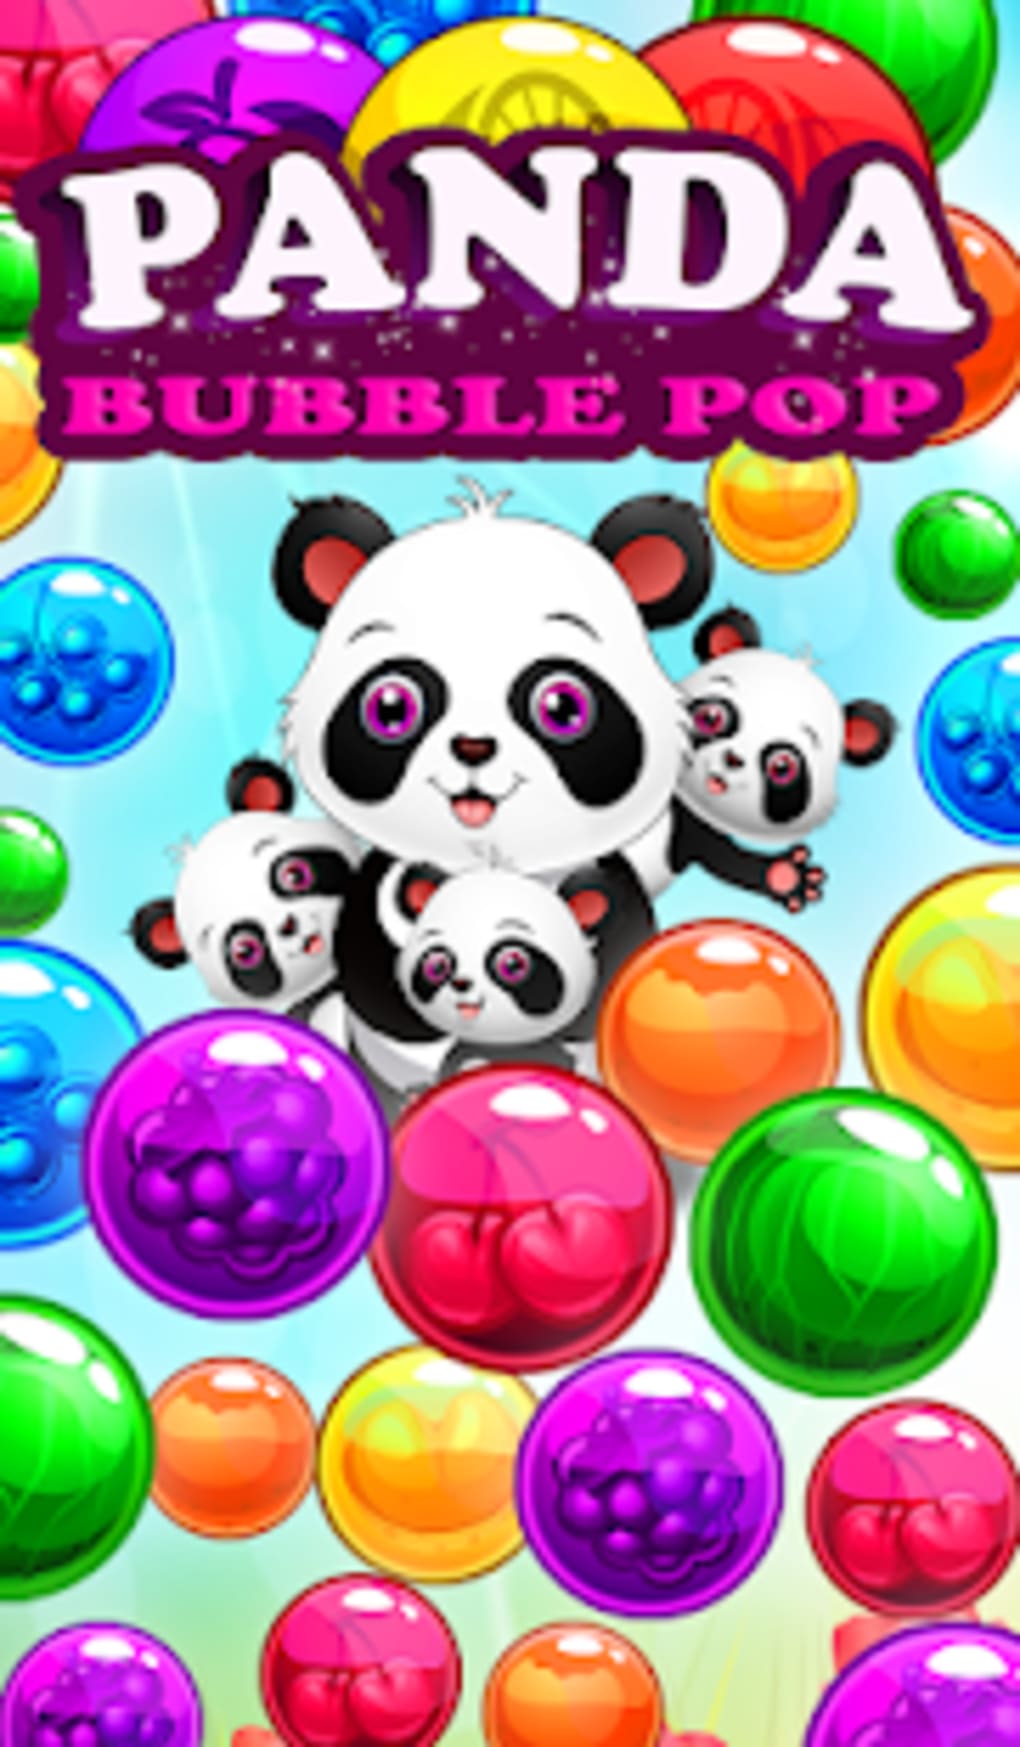 Download Bubble Shooter: Panda Pop! APKs for Android - APKMirror